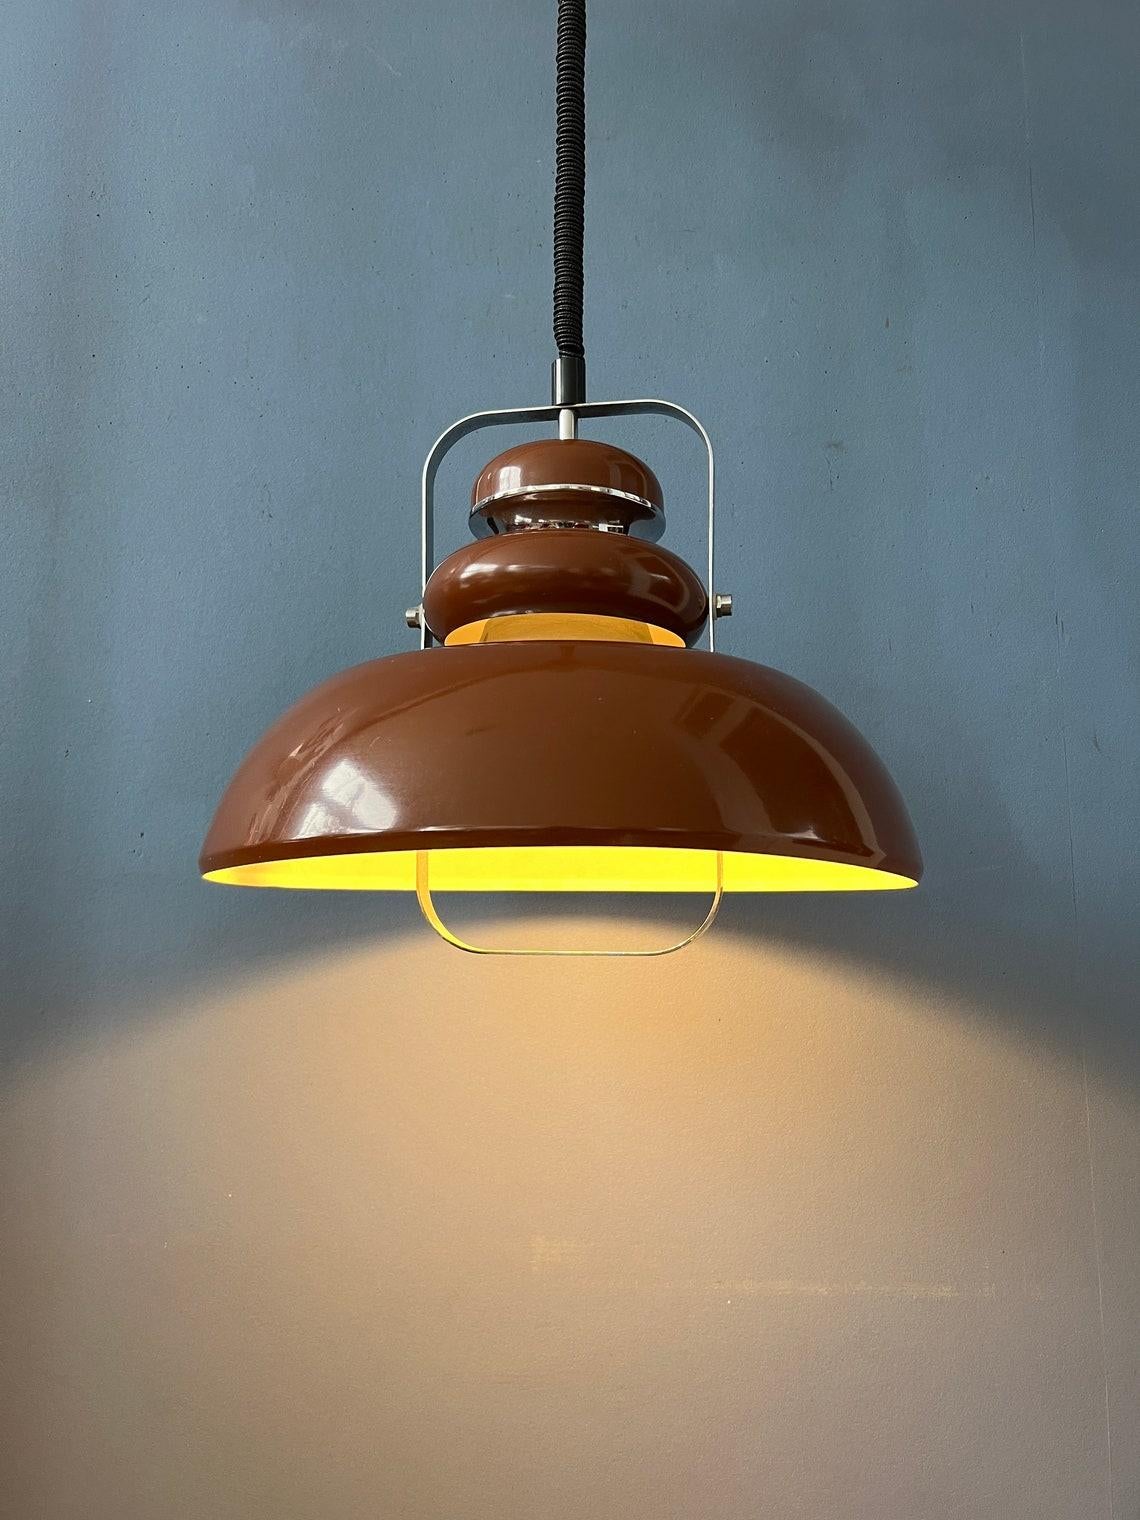 Vintage brown space age age pendant lamp by Anvia. The lamp is beautifully layered with brown parts and chrome parts. The height of the lamp can easily be adjusted with the rise/fall mechanism. The lamp requires one E27/26 (standard)